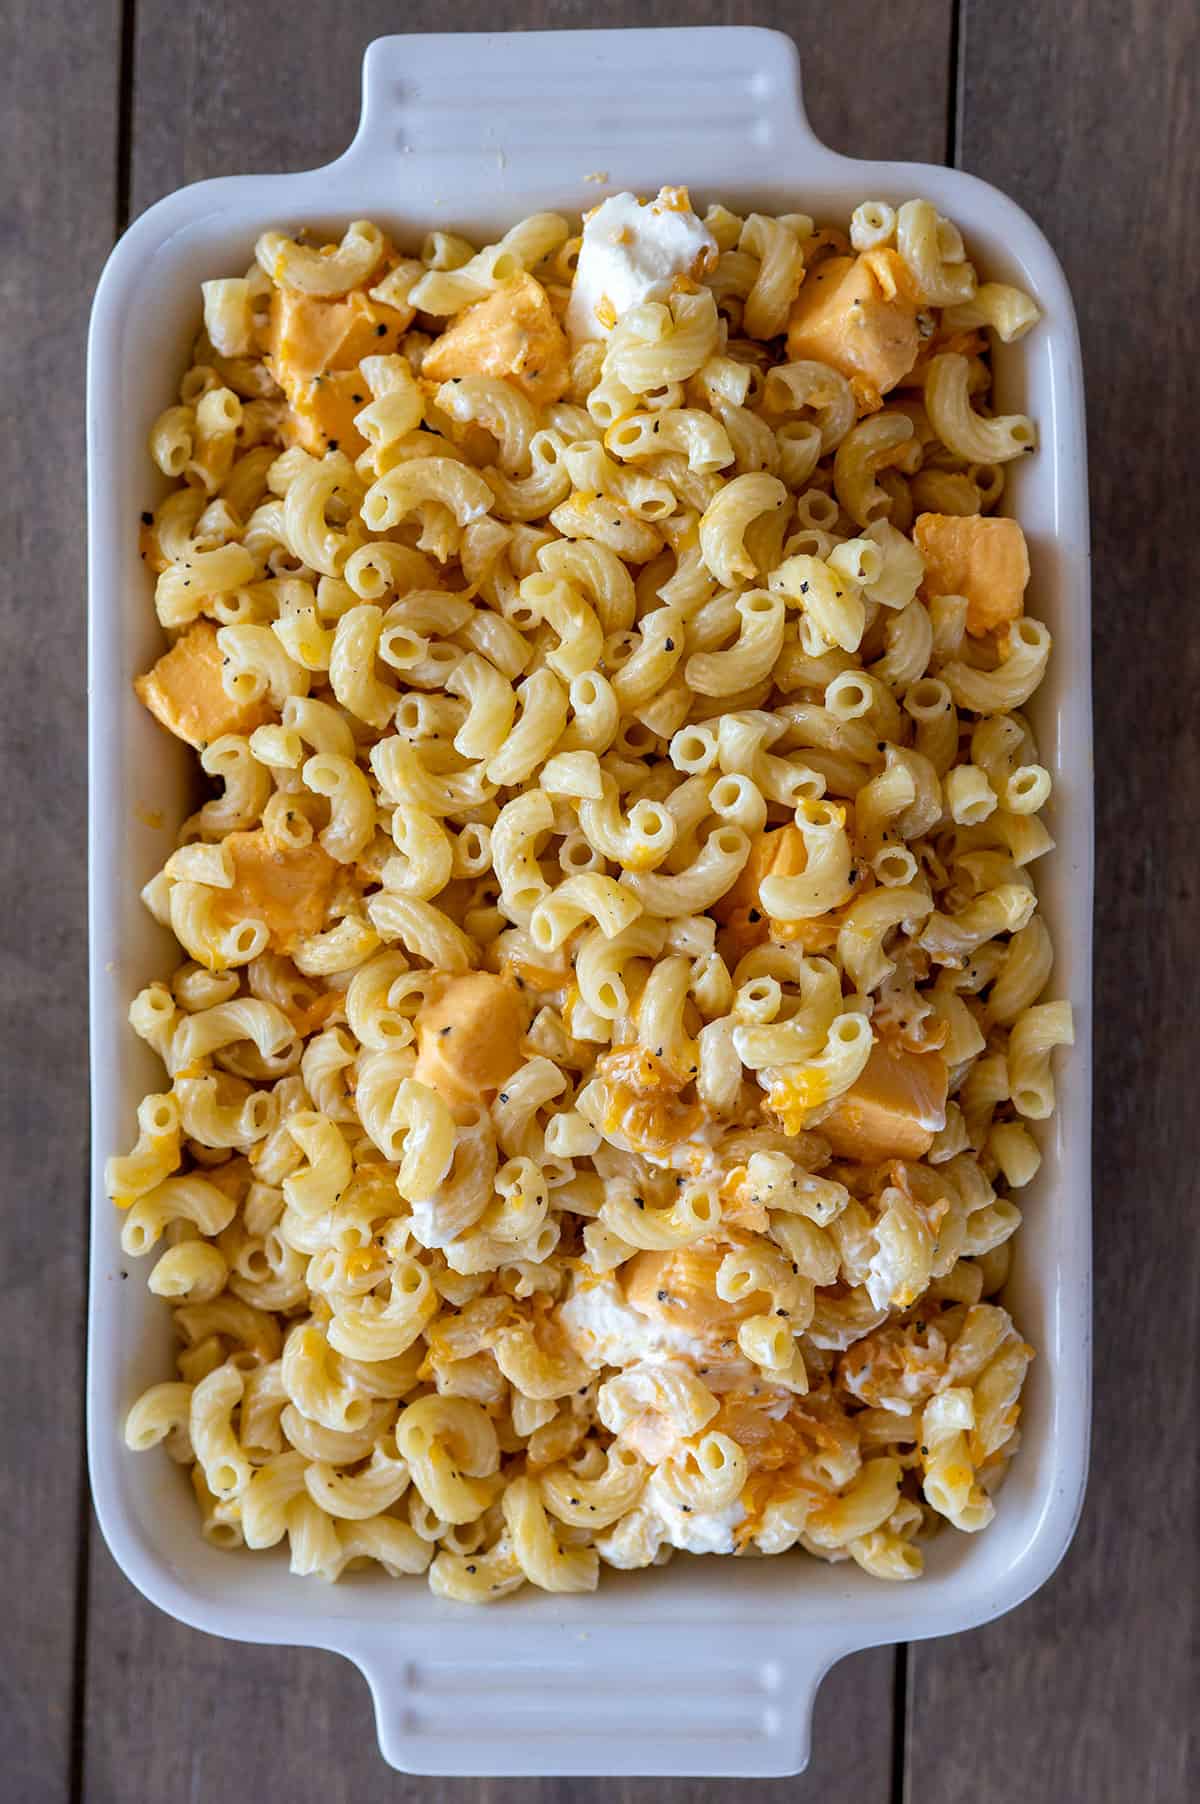 Smoked Mac and Cheese ingredients in dish.